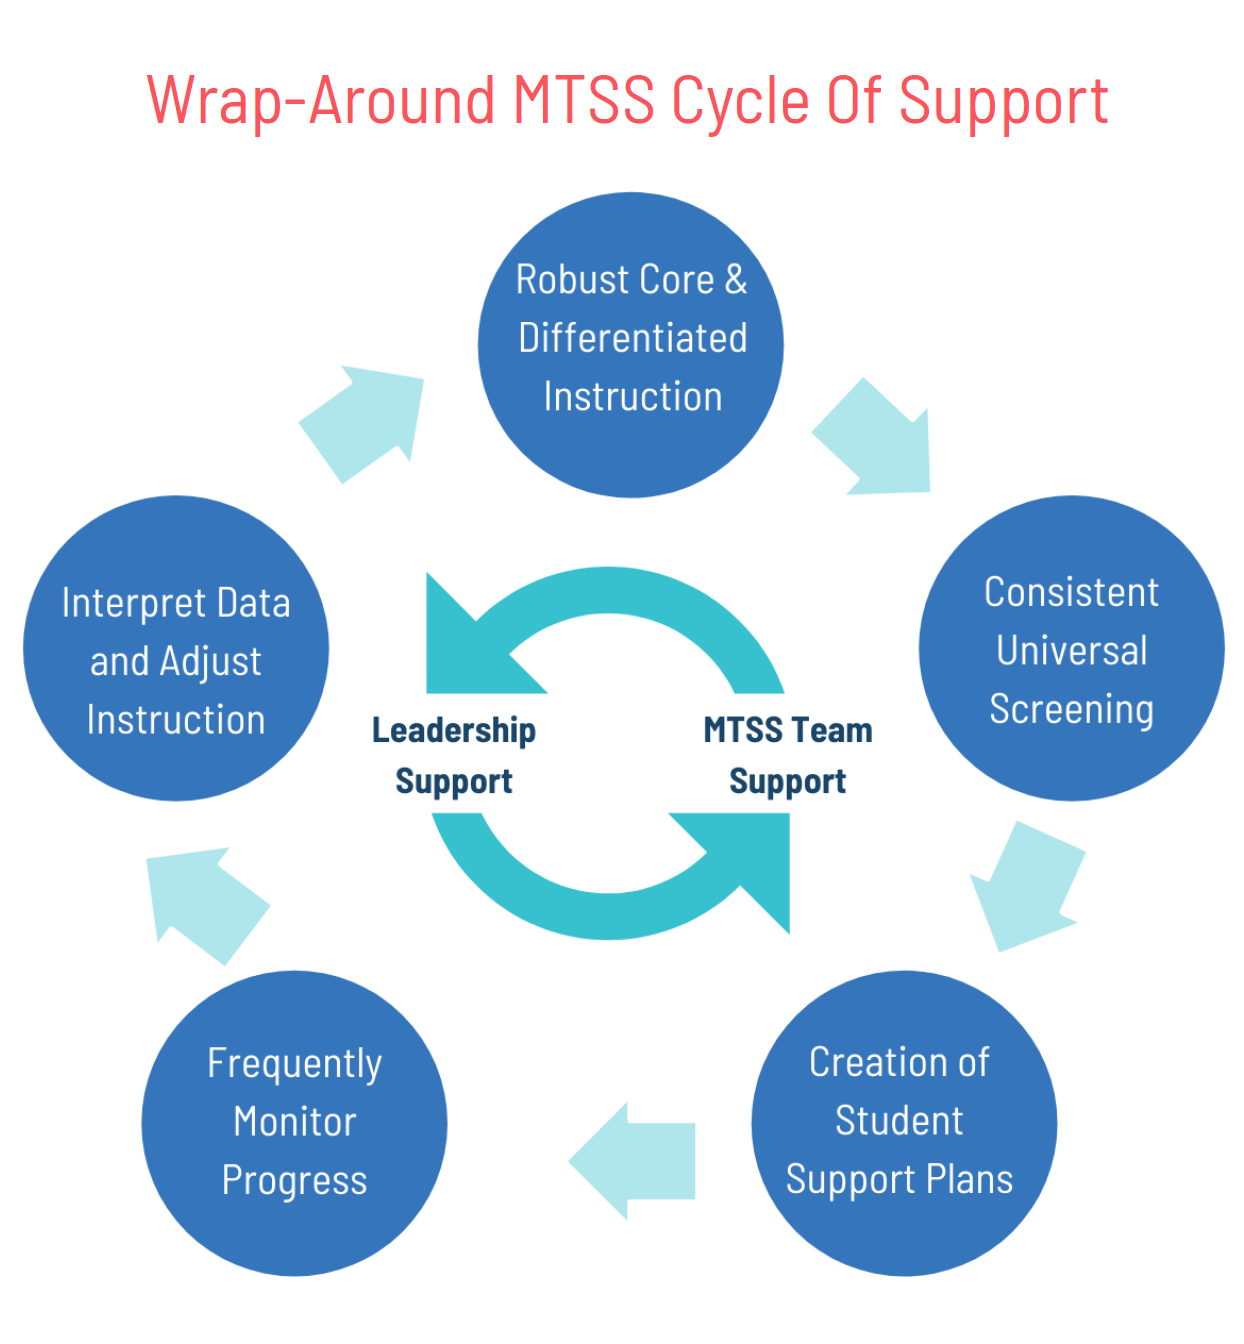 Wrap around MTSS Cycle of Support